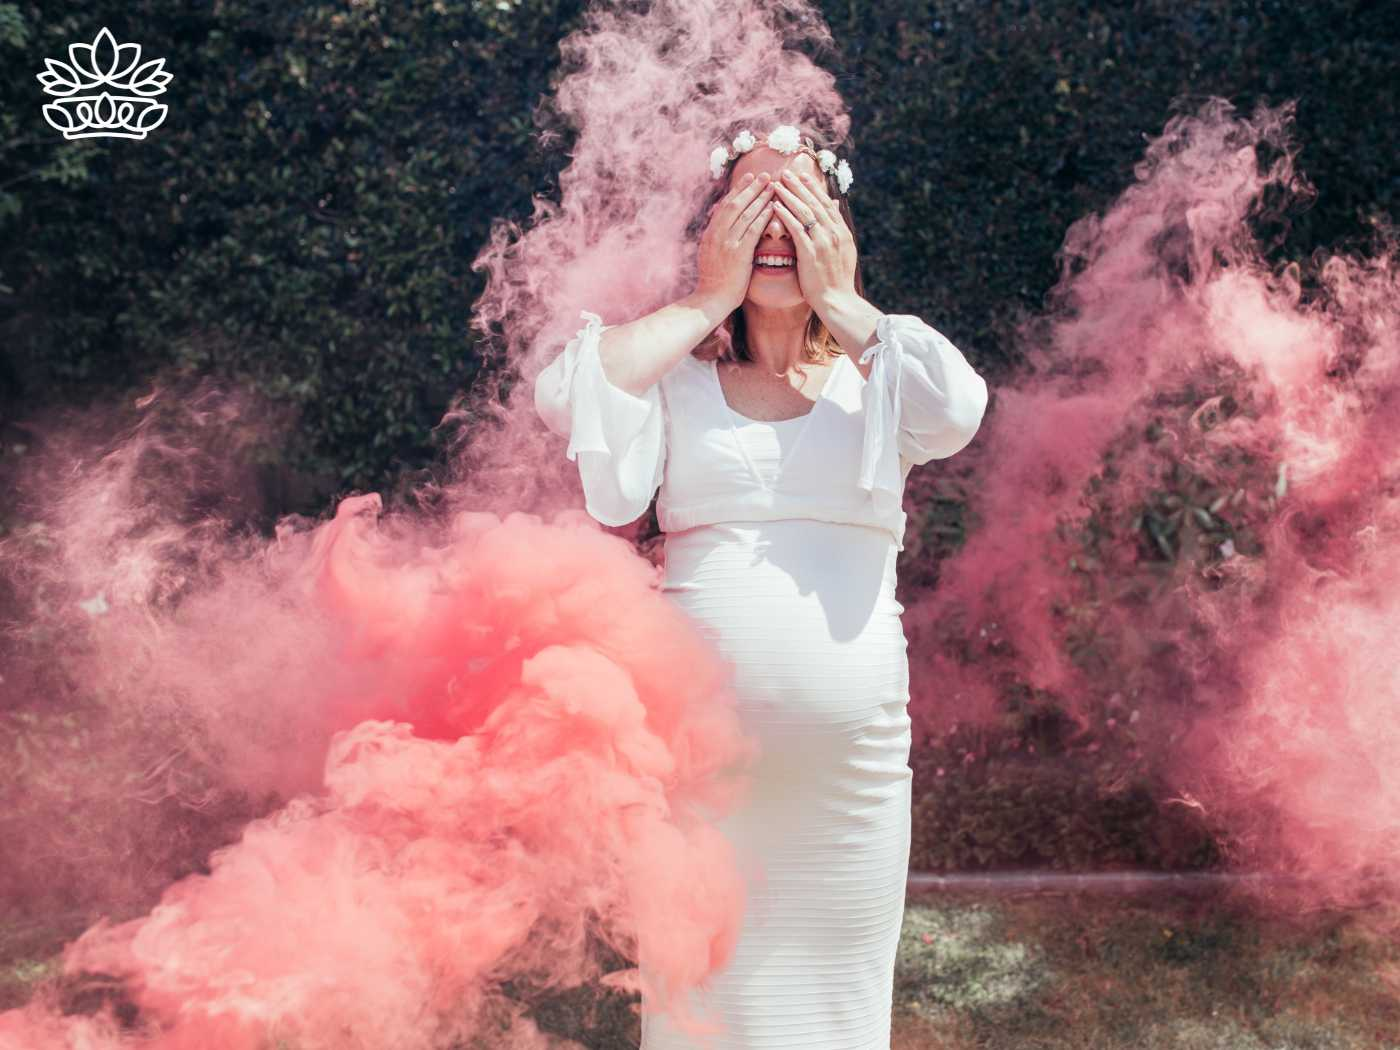 A pregnant woman in a white dress and floral headband stands amidst vibrant pink smoke bombs, expressing joy with her hands covering her eyes, from the Gender Reveal Collection at Fabulous Flowers and Gifts.